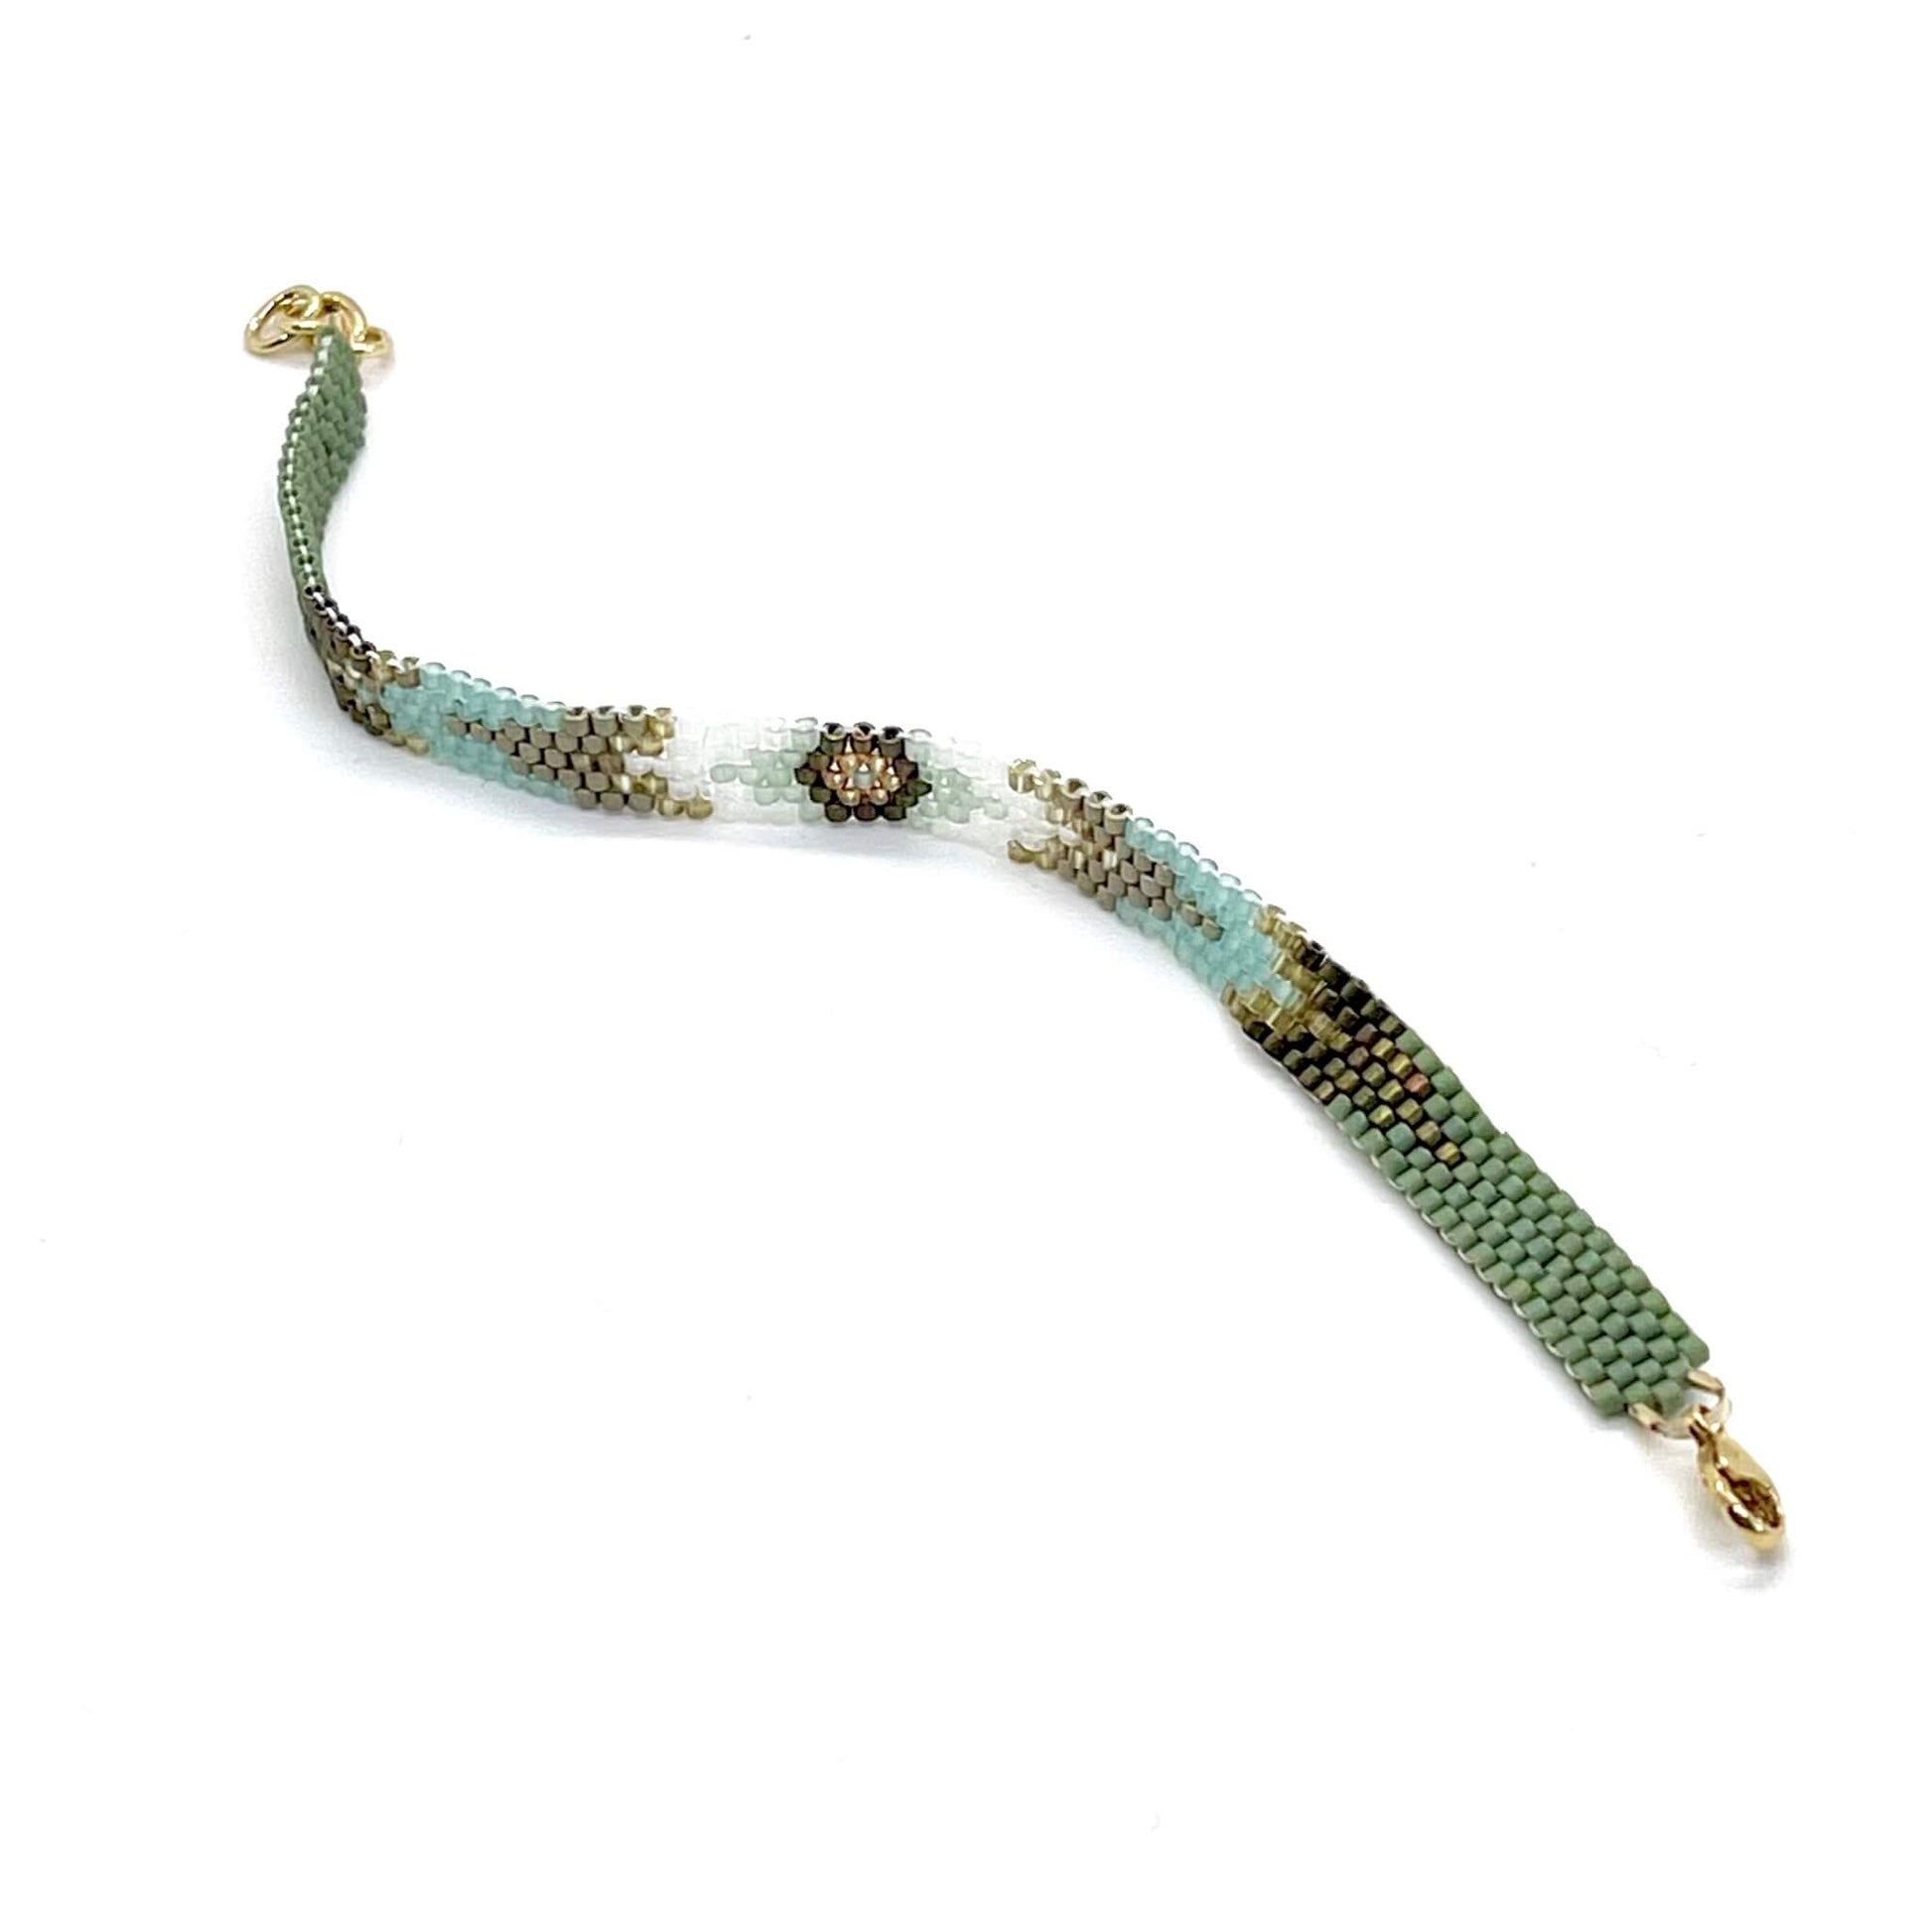 Thin beaded bracelet, woven bracelet with arrow pattern and peyote seed bead stitch in olive and sea foam green.